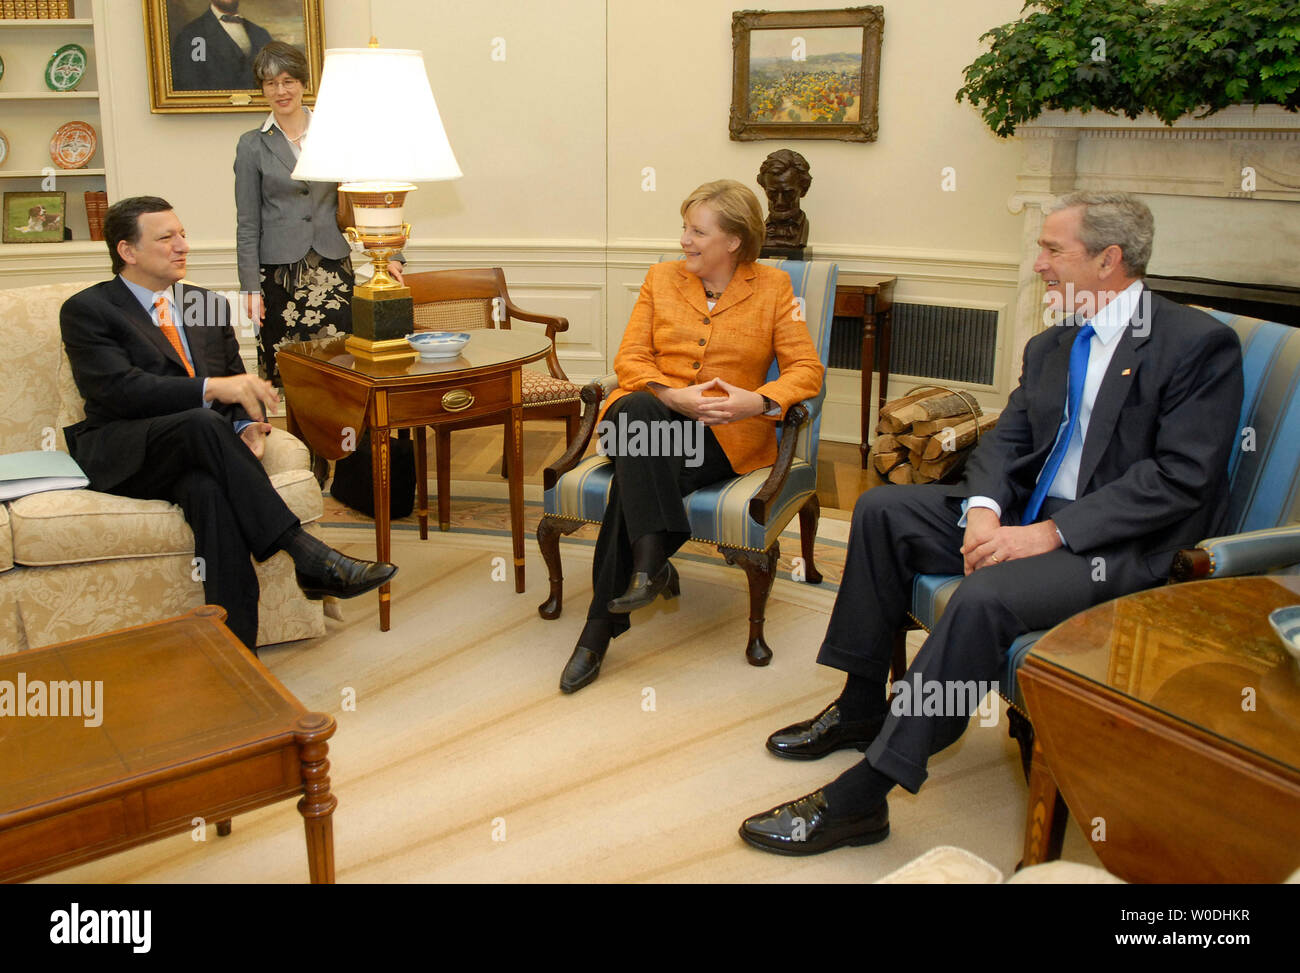 U.S. President George W. Bush (R) meets with the President of the European Council and the Chancellor of the Federal Republic of Germany Angela Merkel (C) and the President of the European Commission Jose Manuel Barroso, in the Oval Office of The White House in Washington on April 30, 2007. (UPI Photo/Kevin Dietsch) Stock Photo